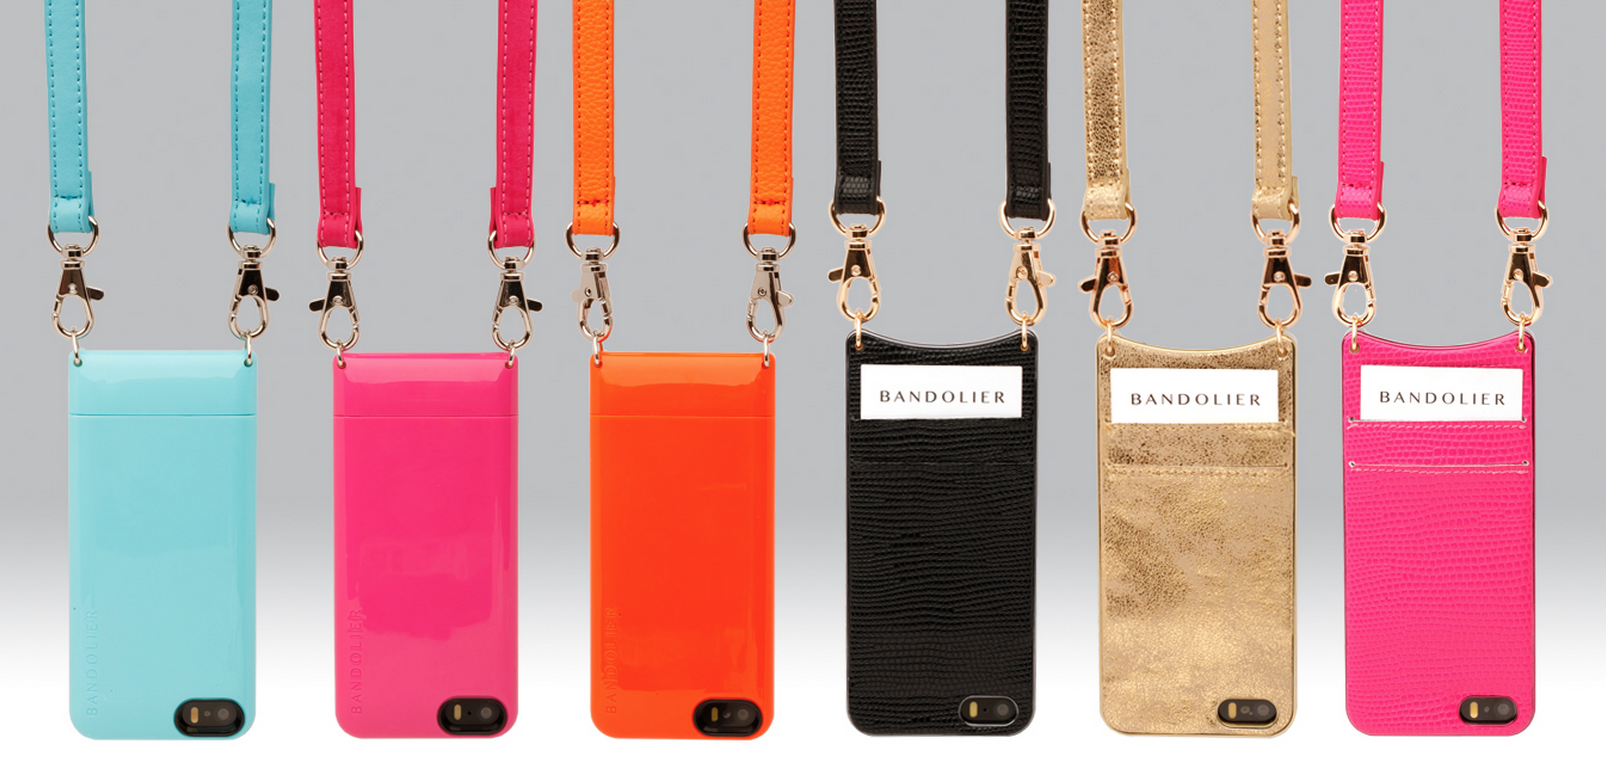 The Bandolier iPhone case: Function meets style meets you need a date night now